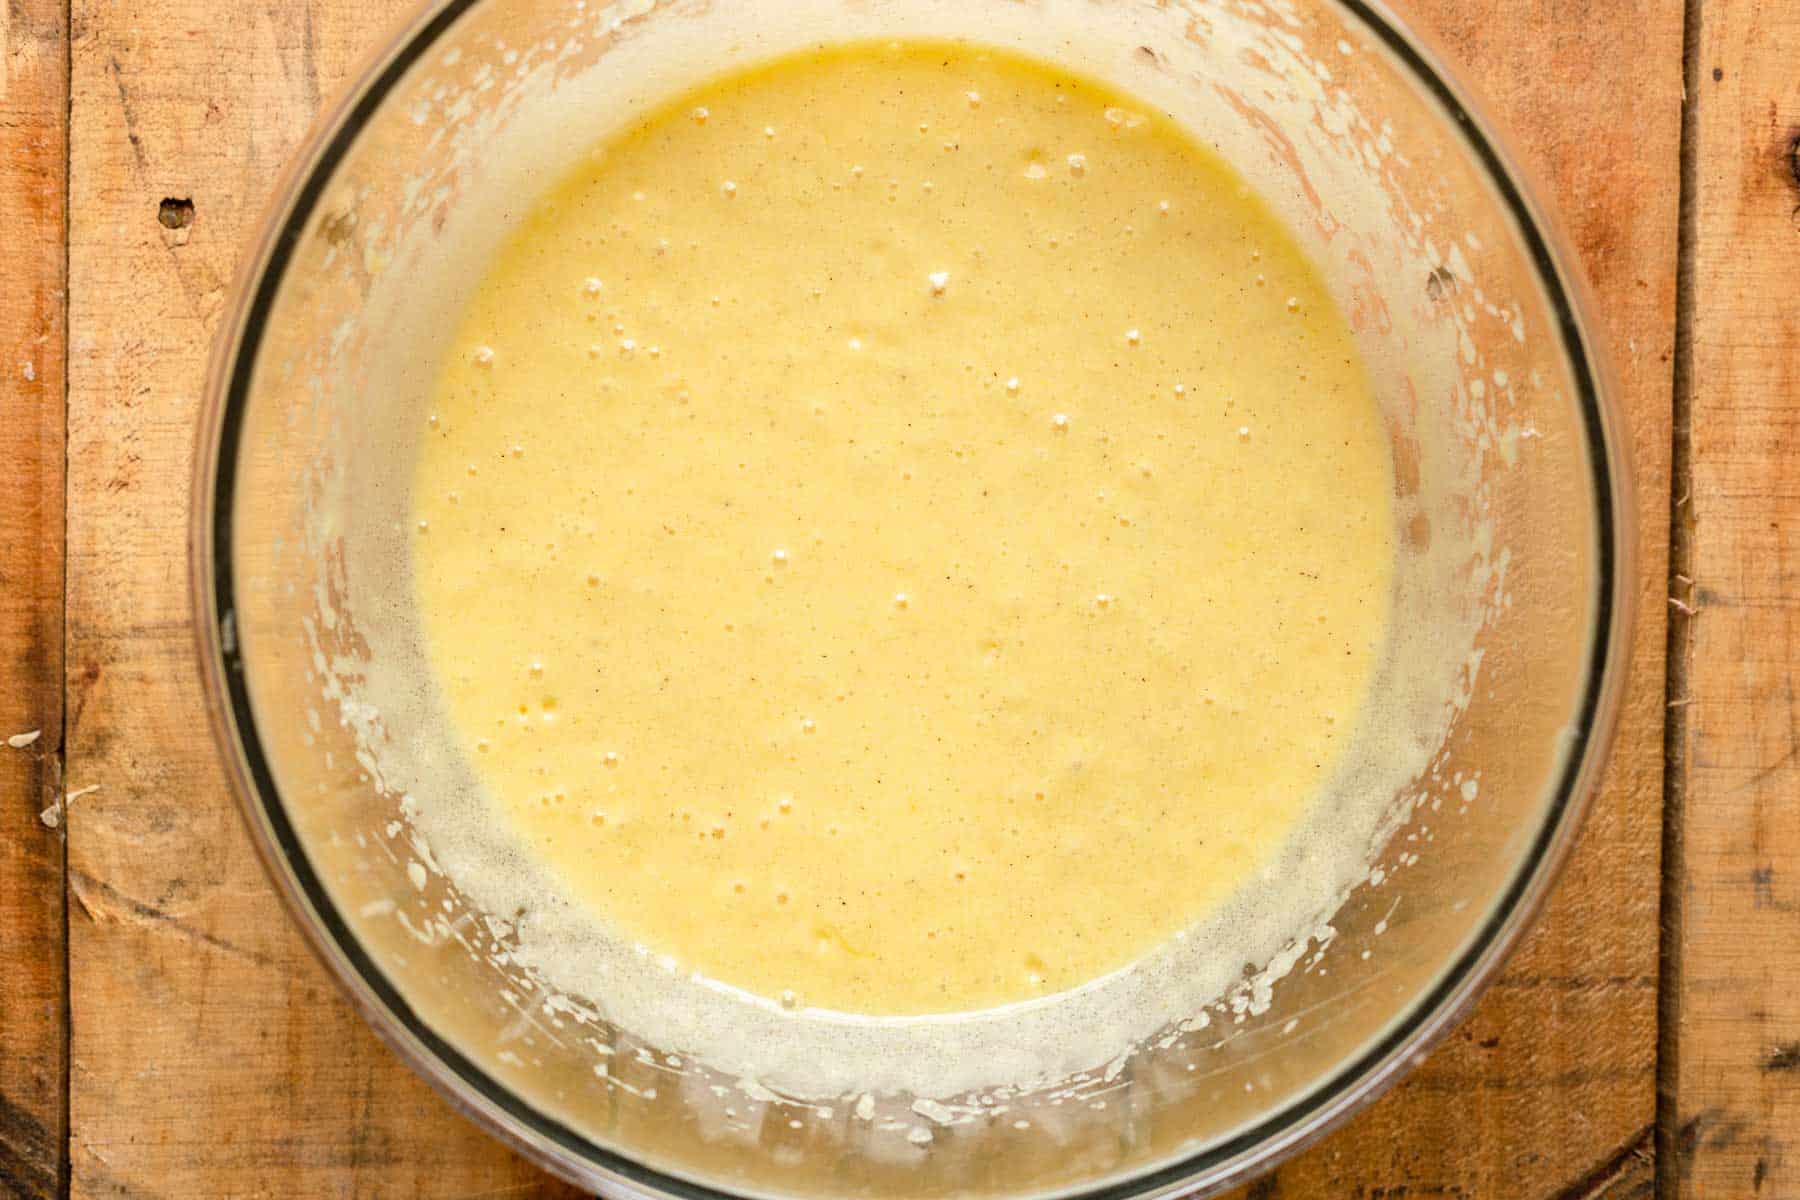 mixing up batter in a bowl for cake mix